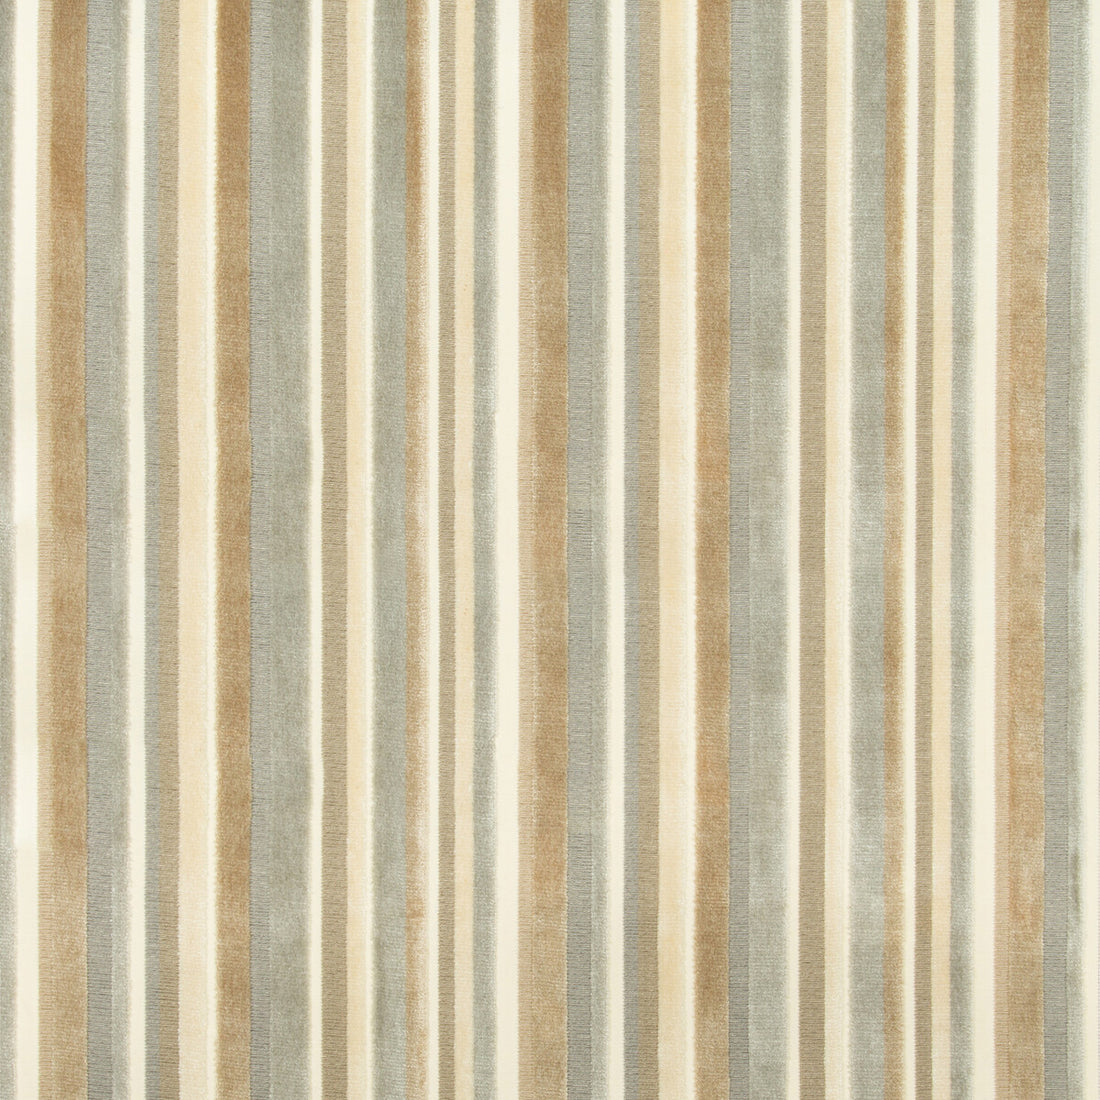 Bodenham fabric in stone color - pattern 35302.16.0 - by Kravet Basics in the Greenwich collection